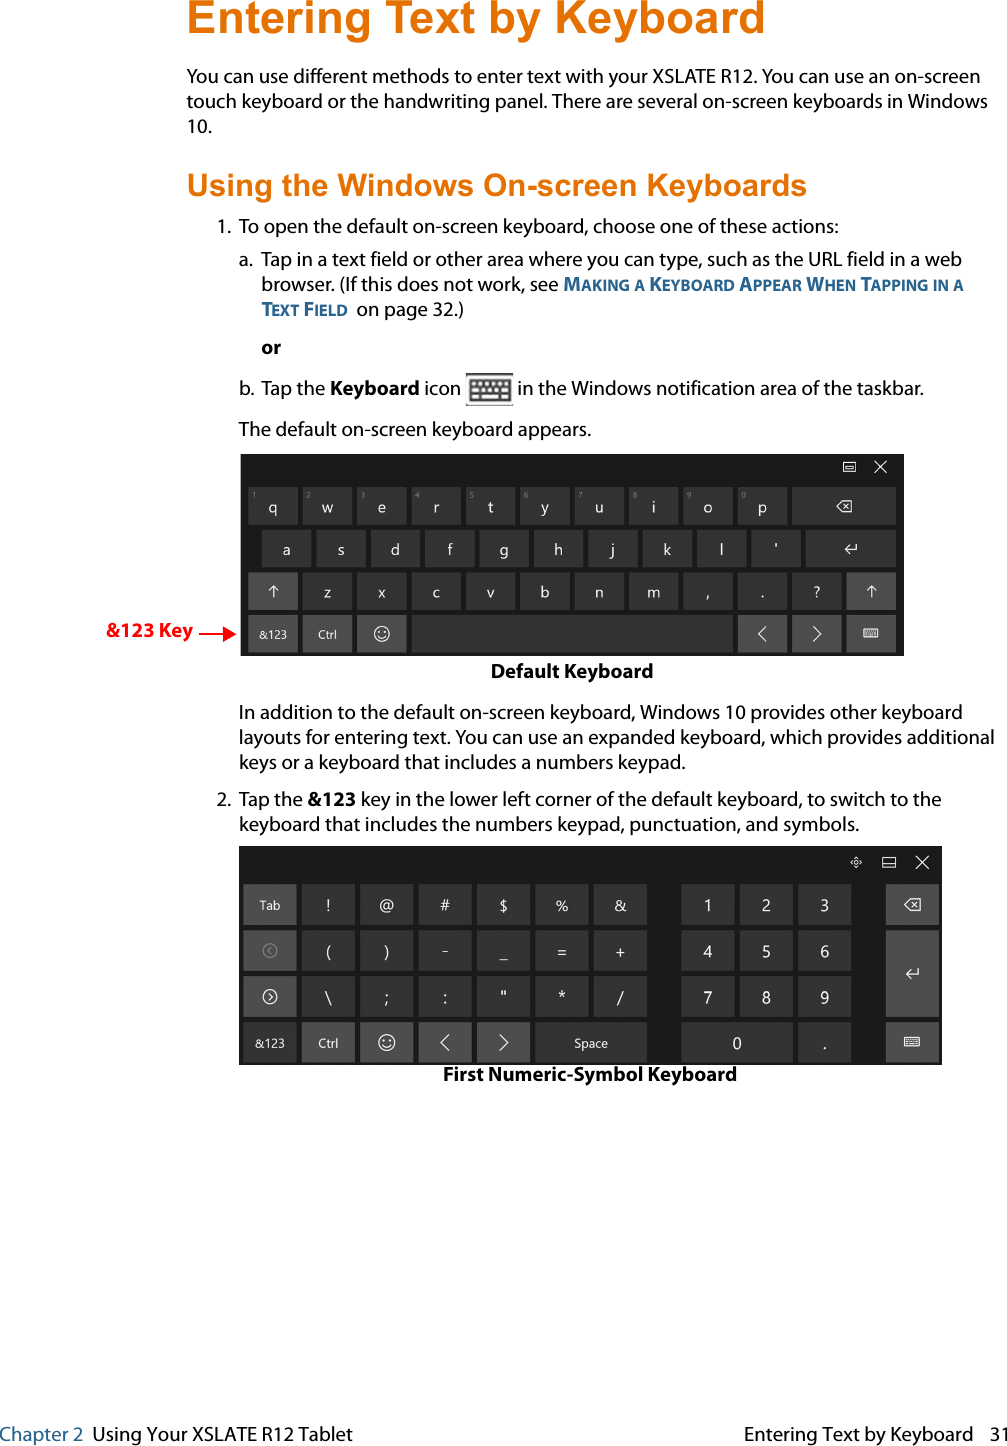 Chapter 2  Using Your XSLATE R12 Tablet Entering Text by Keyboard 31Entering Text by Keyboard You can use different methods to enter text with your XSLATE R12. You can use an on-screen touch keyboard or the handwriting panel. There are several on-screen keyboards in Windows 10. Using the Windows On-screen Keyboards 1. To open the default on-screen keyboard, choose one of these actions:   a. Tap in a text field or other area where you can type, such as the URL field in a web browser. (If this does not work, see MAKING A KEYBOARD APPEAR WHEN TAPPING IN A TEXT FIELD  on page 32.) or b. Tap the Keyboard icon   in the Windows notification area of the taskbar. The default on-screen keyboard appears.  &amp;123 KeyDefault Keyboard In addition to the default on-screen keyboard, Windows 10 provides other keyboard layouts for entering text. You can use an expanded keyboard, which provides additional keys or a keyboard that includes a numbers keypad. 2. Tap the &amp;123 key in the lower left corner of the default keyboard, to switch to the keyboard that includes the numbers keypad, punctuation, and symbols. First Numeric-Symbol Keyboard     